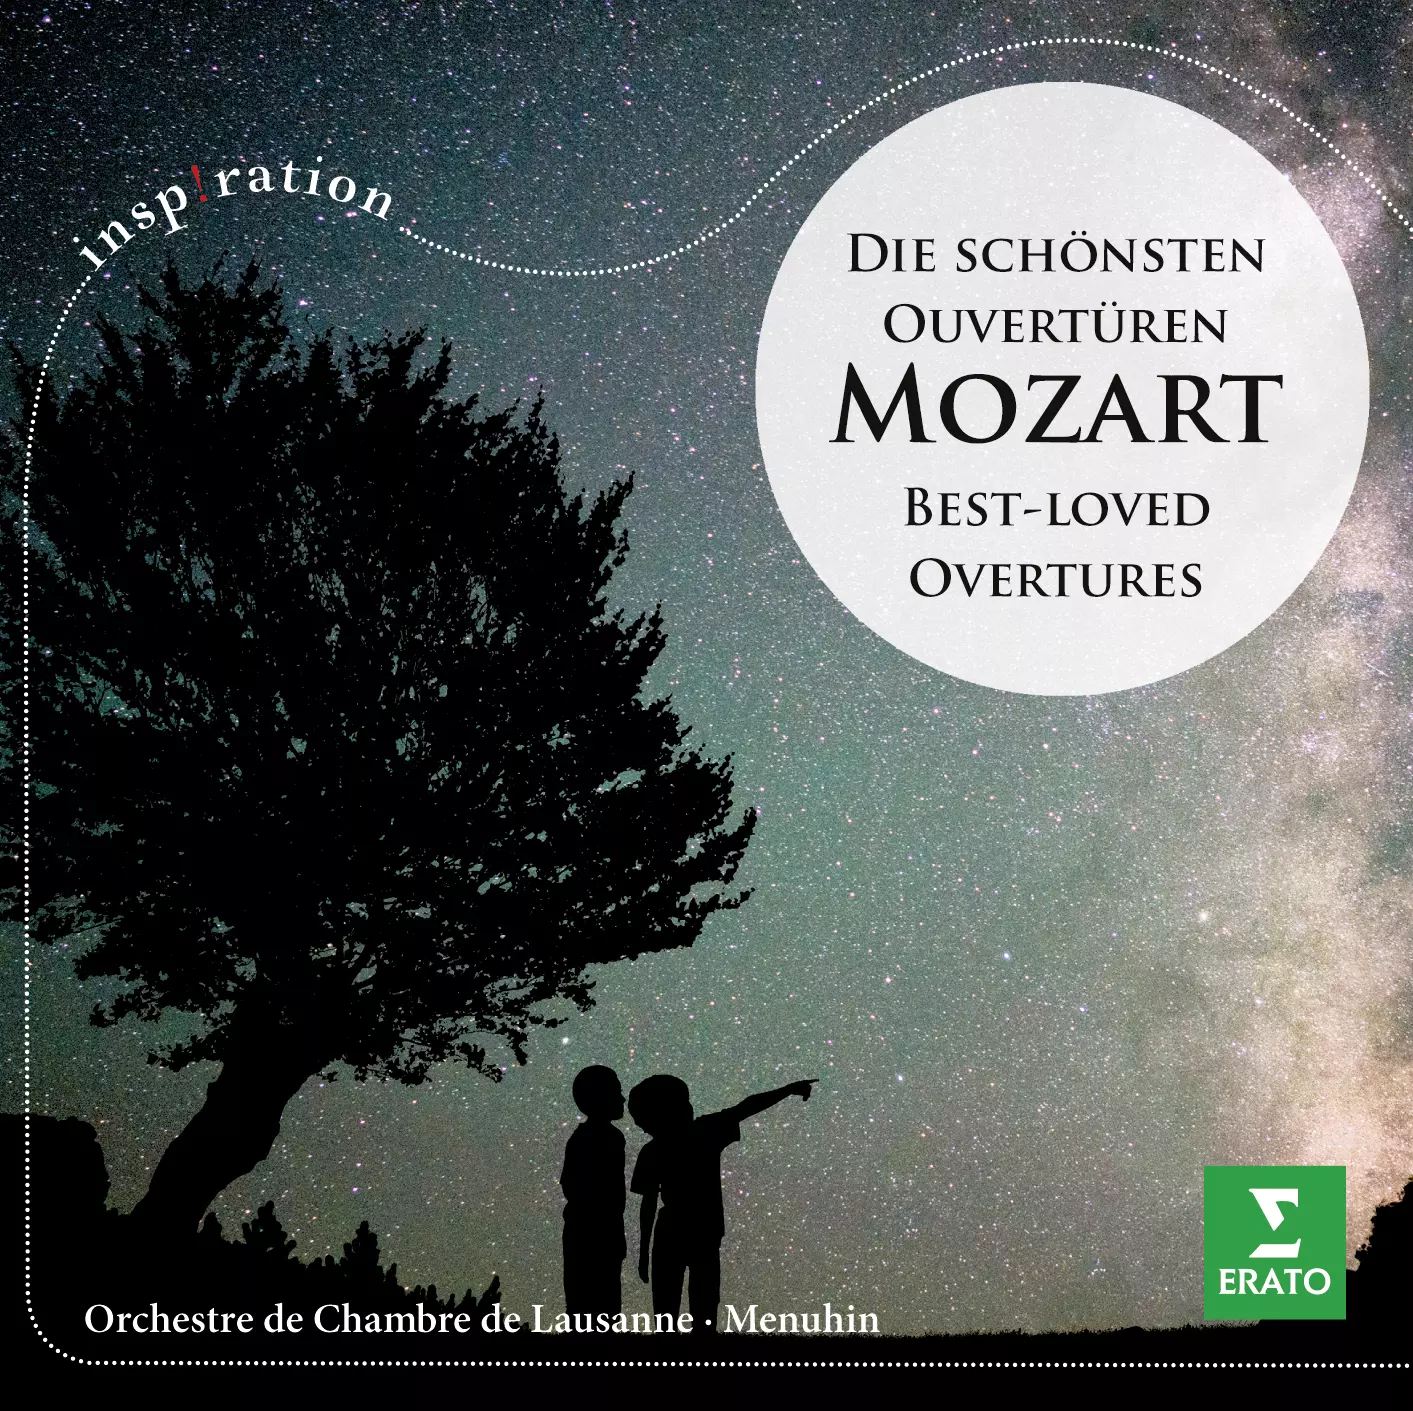 Mozart: The most beautiful overtures